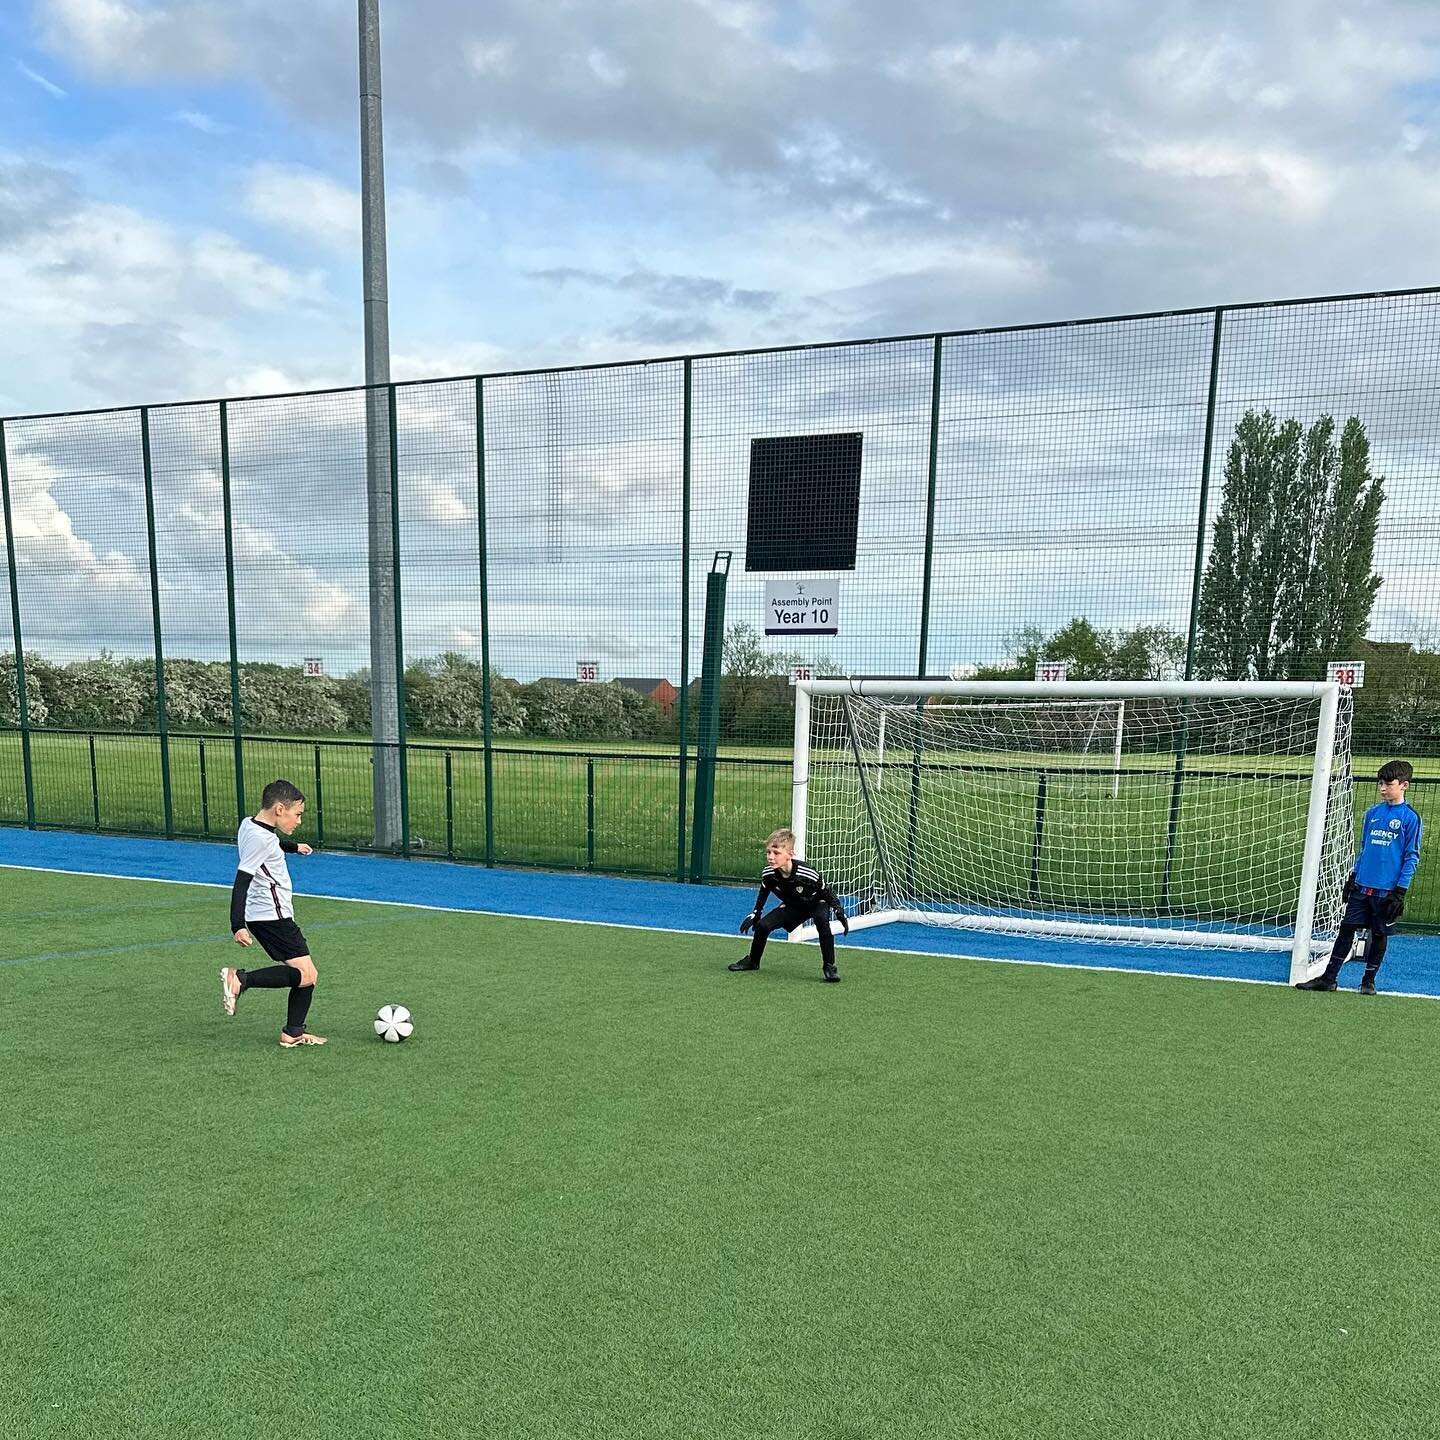 Last nights training session 📸 

Another great session focusing on shooting ⚽️ and shot stopping 🧤.. a big well done to all the players 👏😁 the 🌧️ didn&rsquo;t stop us‼️

Get signed up to our monthly programme or next weeks session through our we